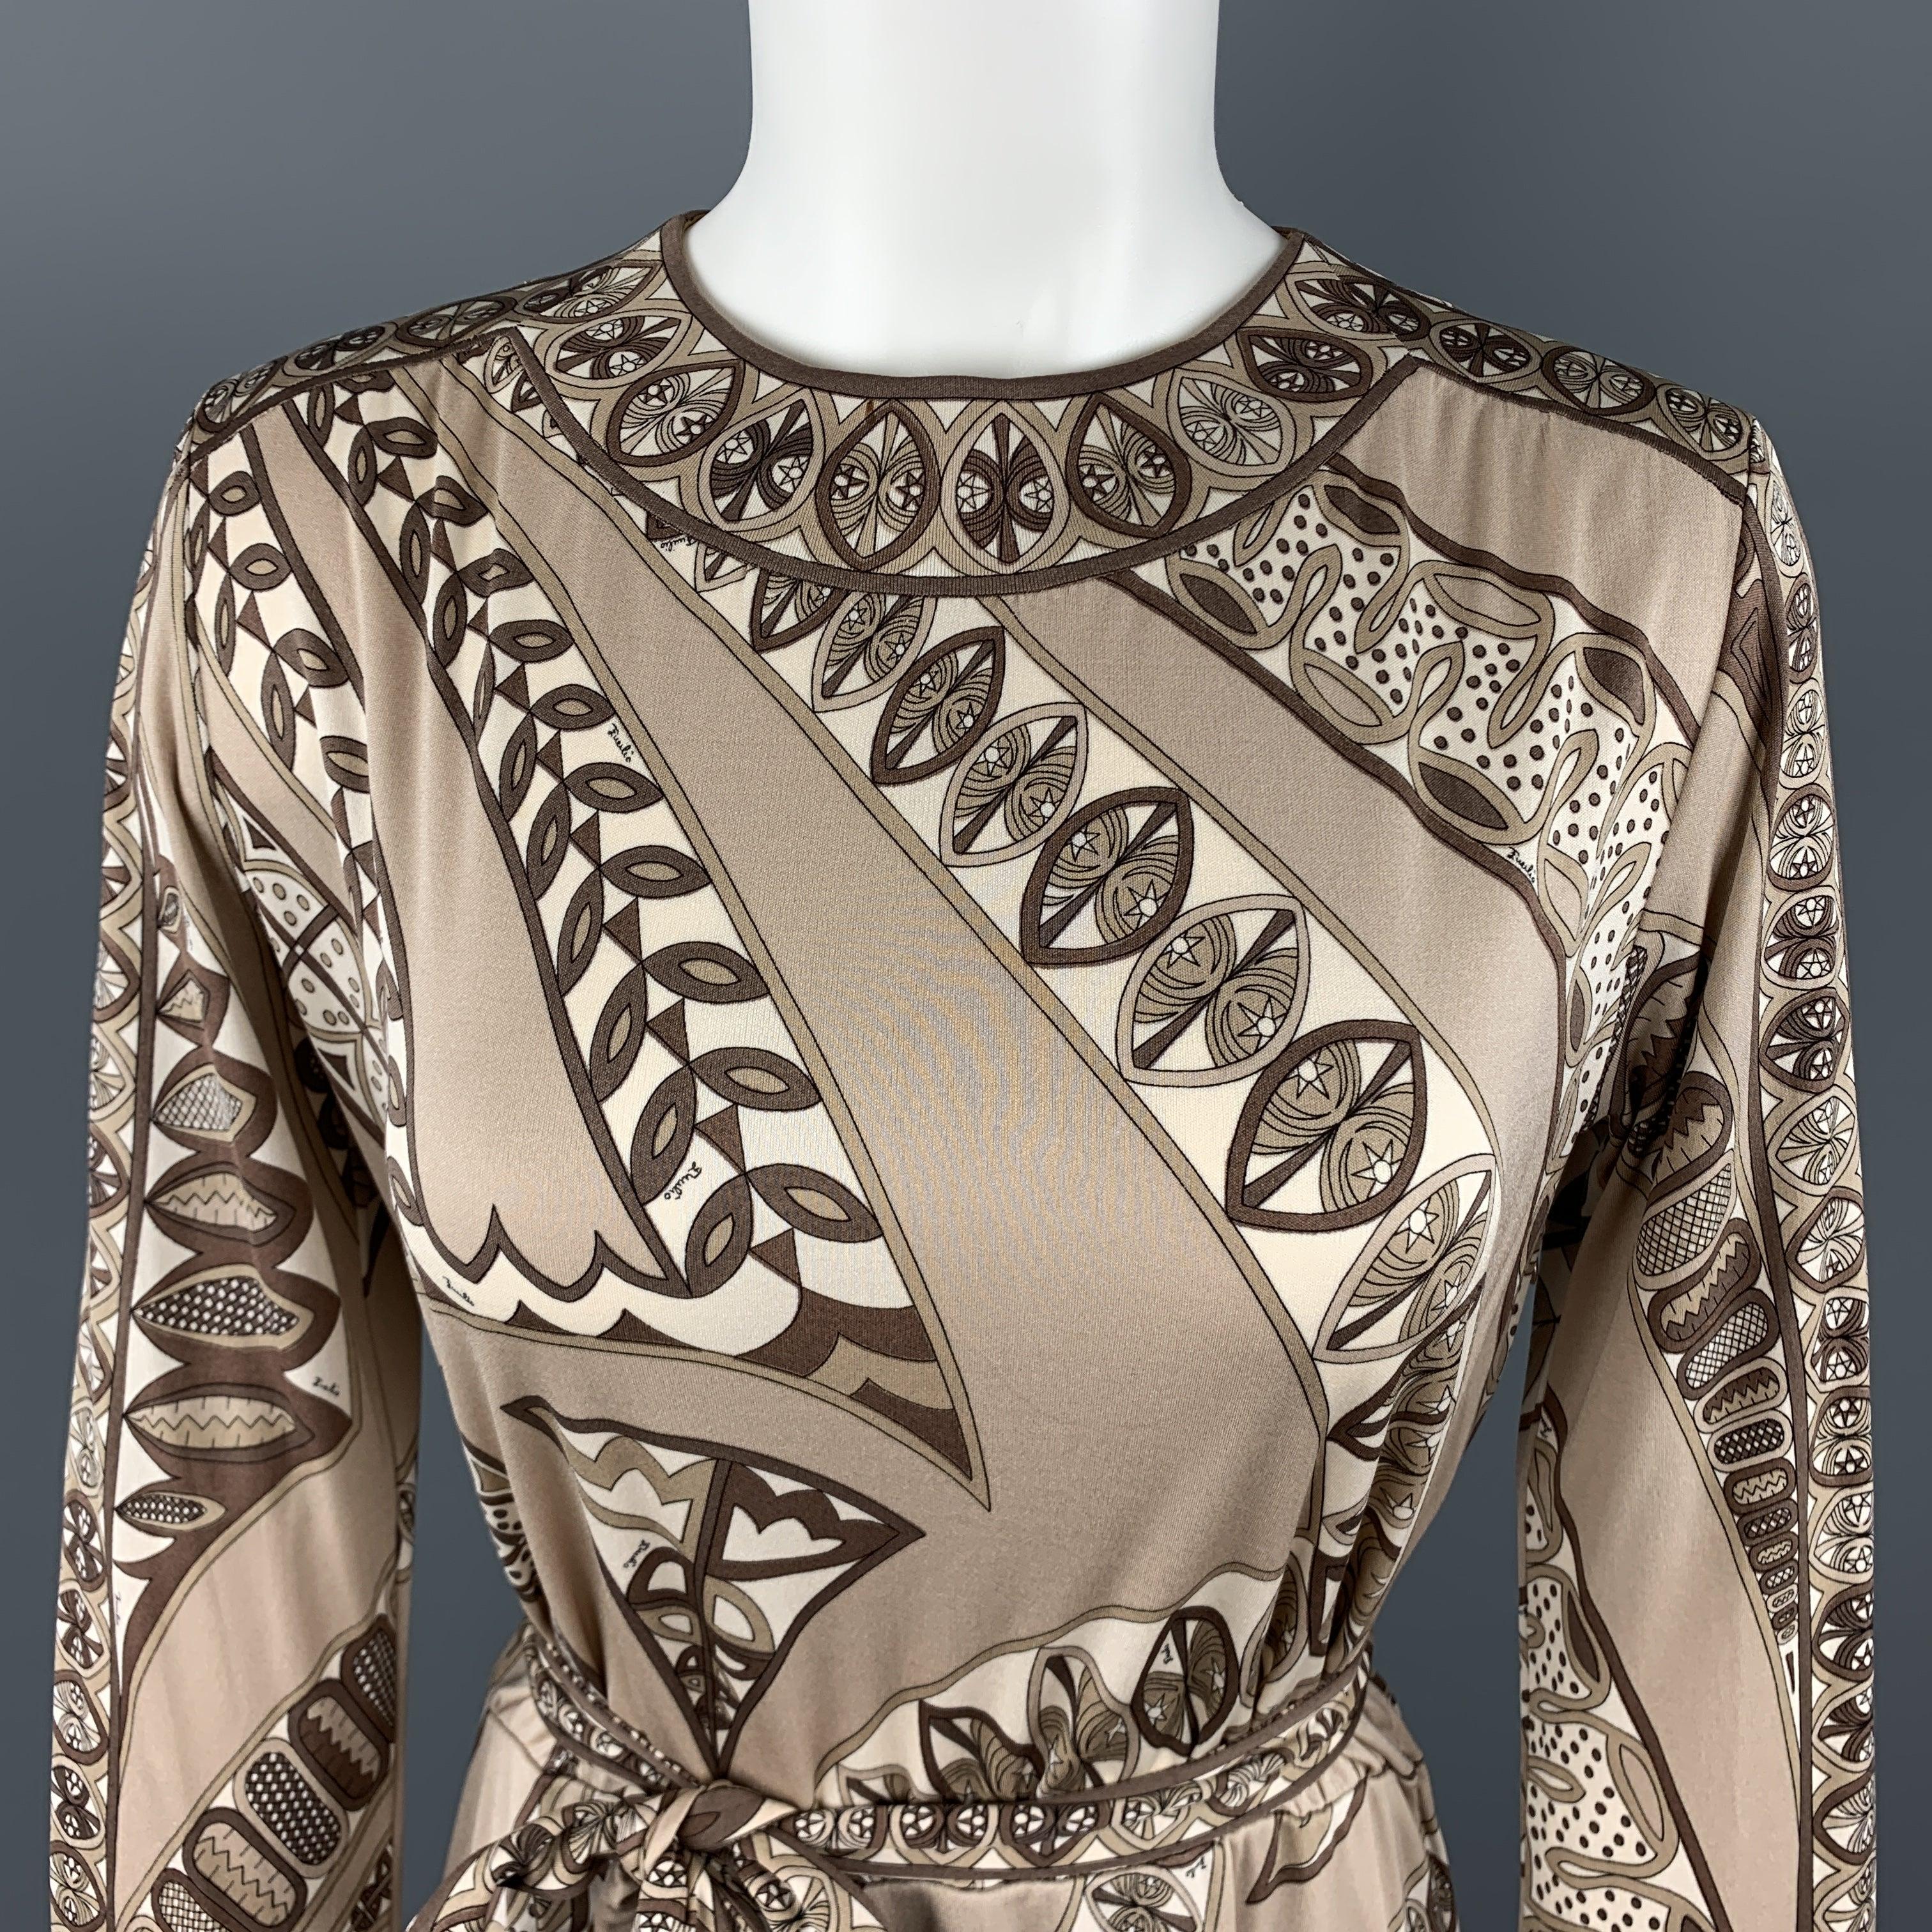 Vintage EMILIO PUCCI shift dress comes in taupe print silk jersey with a round neckline, tied belt waist, long blouse sleeves, and A line skirt. Wear and marks throughout. As-is. Made in Italy.Fair
Pre-Owned Condition. 

Marked:   8 

Measurements: